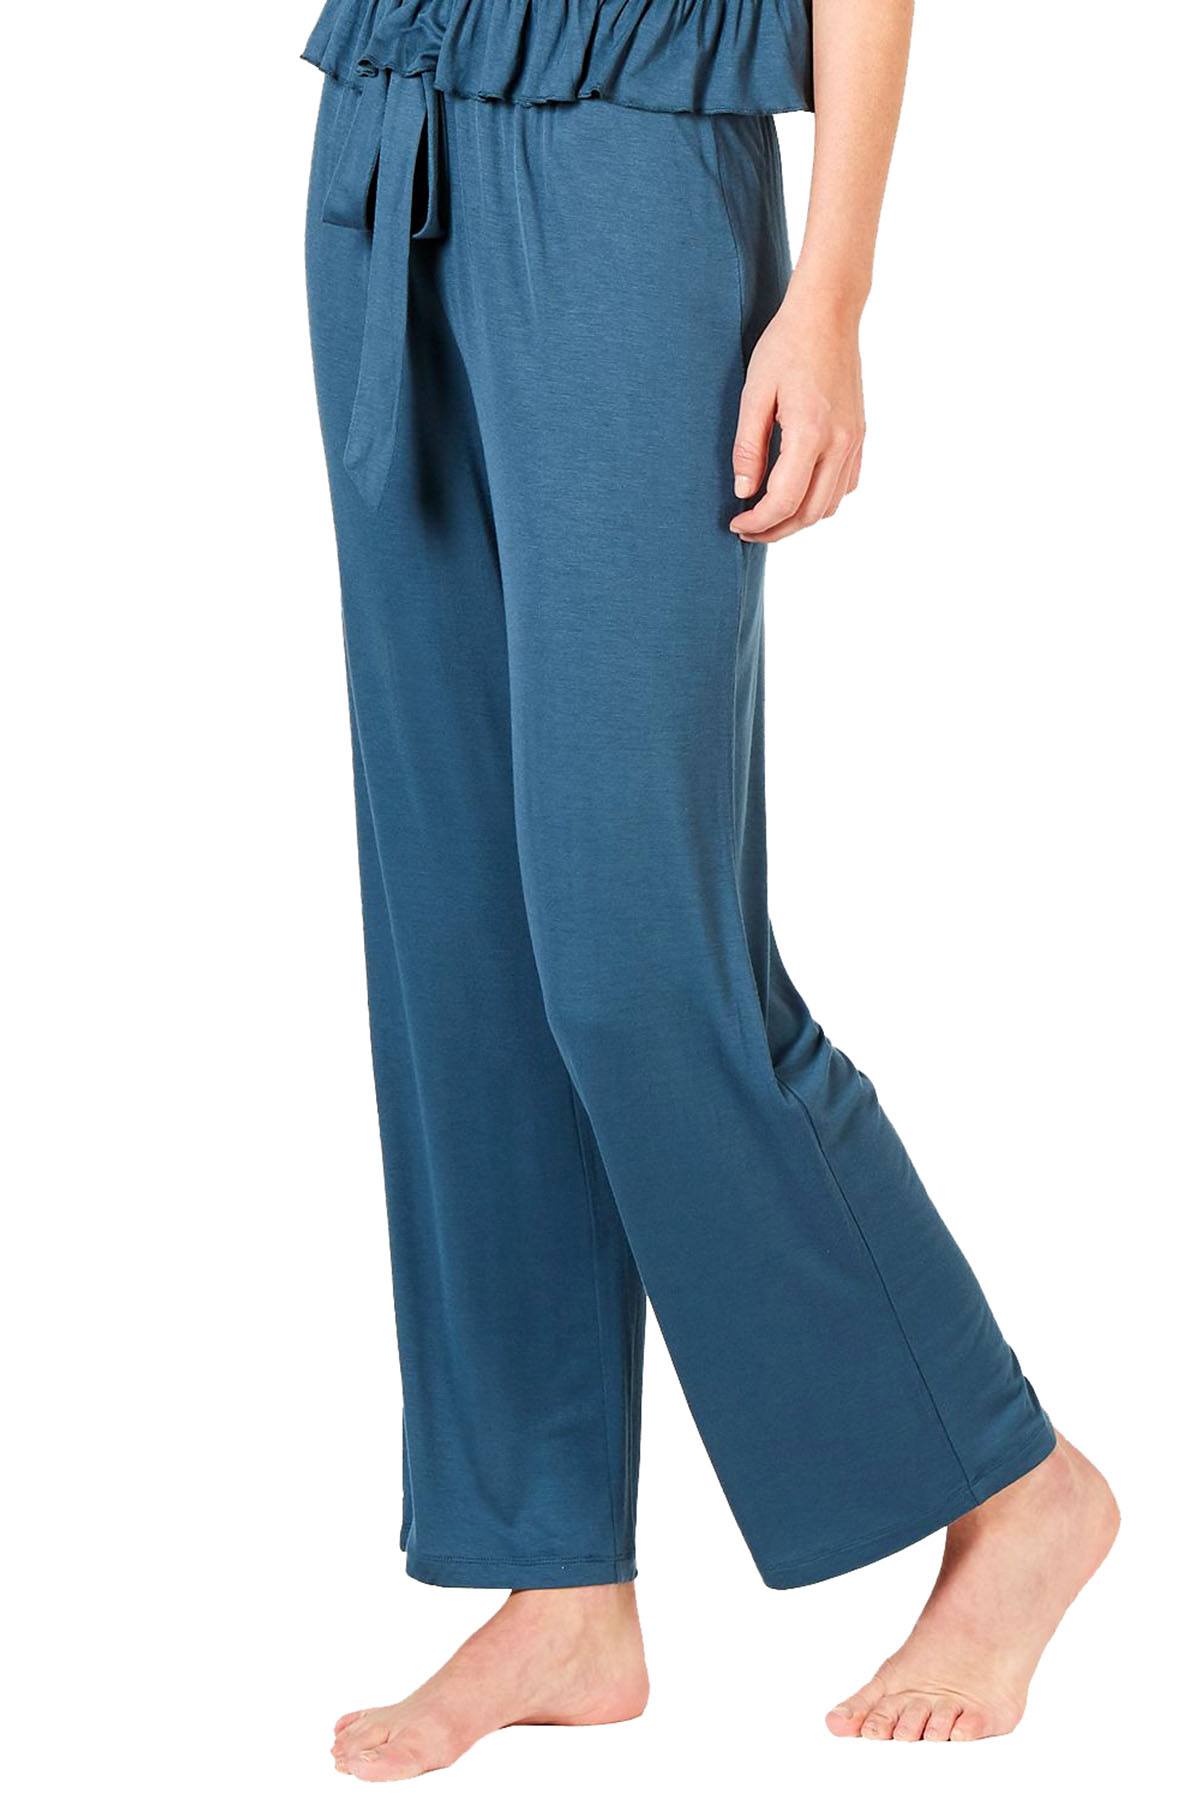 INC International Concepts Ultra Soft Knit Ruching Pants in Teal Enamel